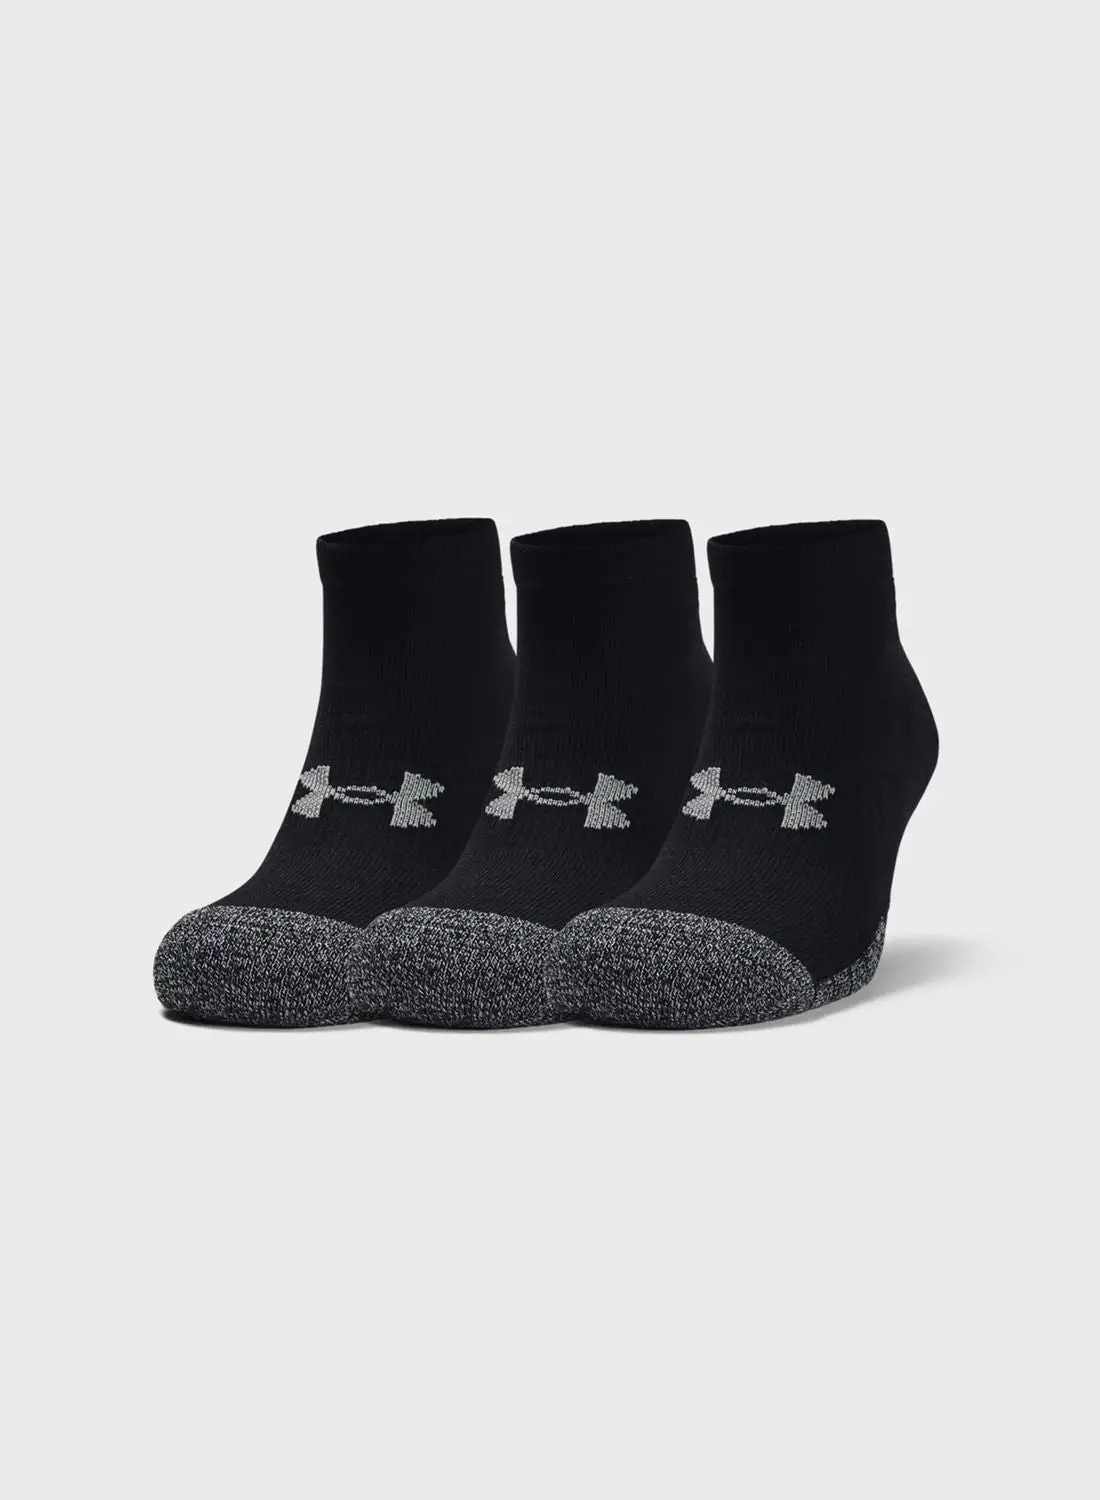 UNDER ARMOUR Performance Tech 3-Pack Low Cut Socks